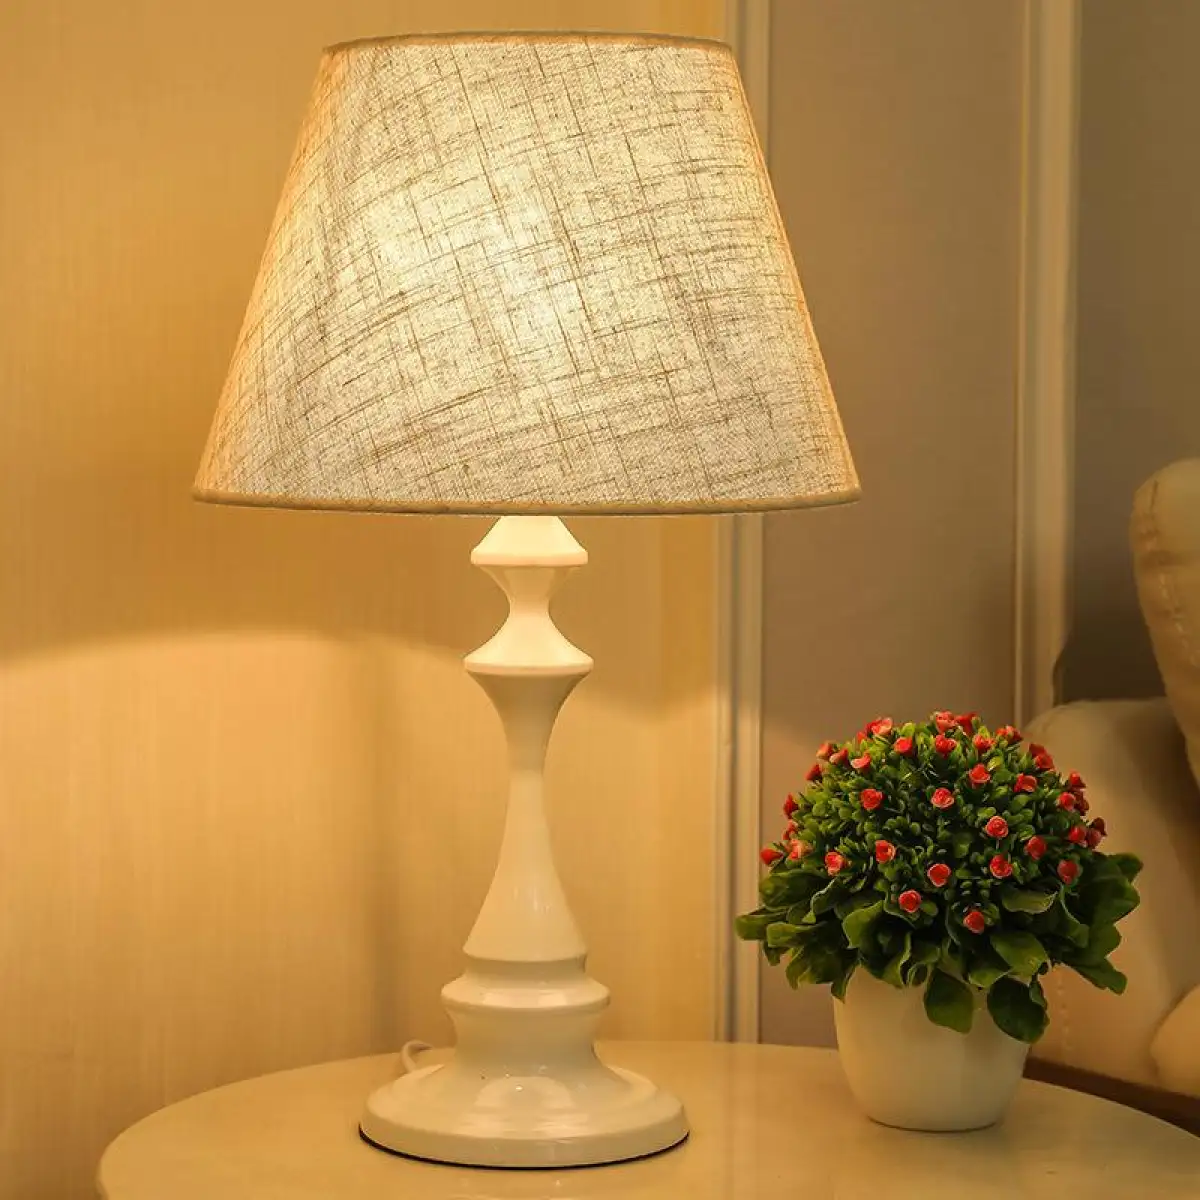 American Country Style Table Lamp, Country Style Bedside Table Lampshade